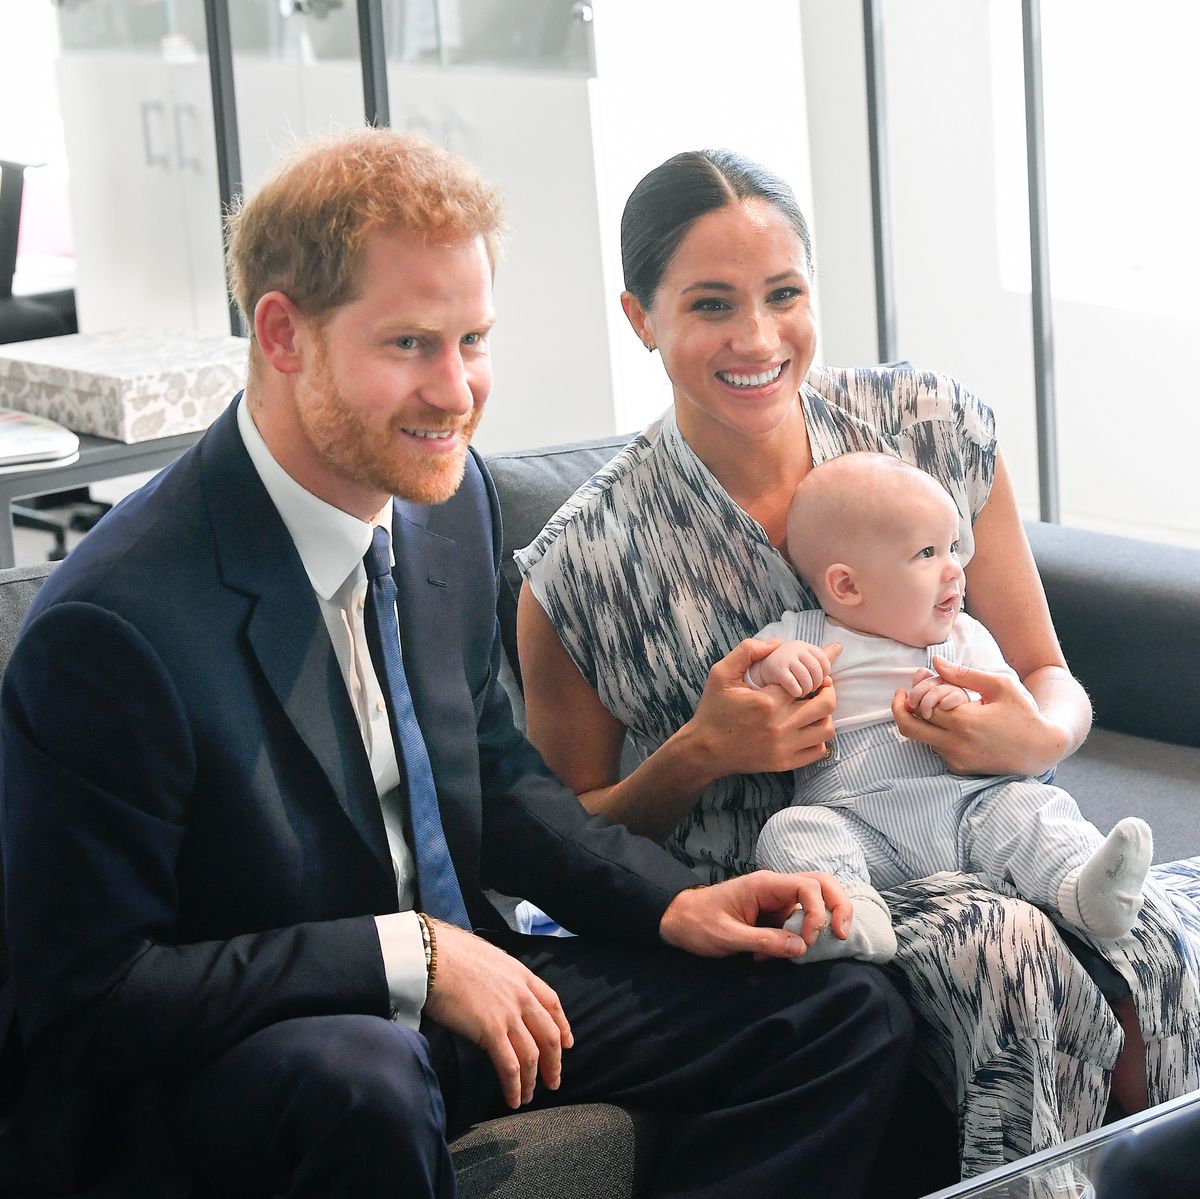 Prince Harry Says He Prioritizes Affection for Archie and Lilibet: 'Smother Them with Love'
#hotgossipnewz #parents #PrinceHarry #PrioritizesAffection #ArchieHarrison #LilibetDiana #SmotherThemwithLove #royals
hotgossipnewz.blogspot.com/2023/03/prince…